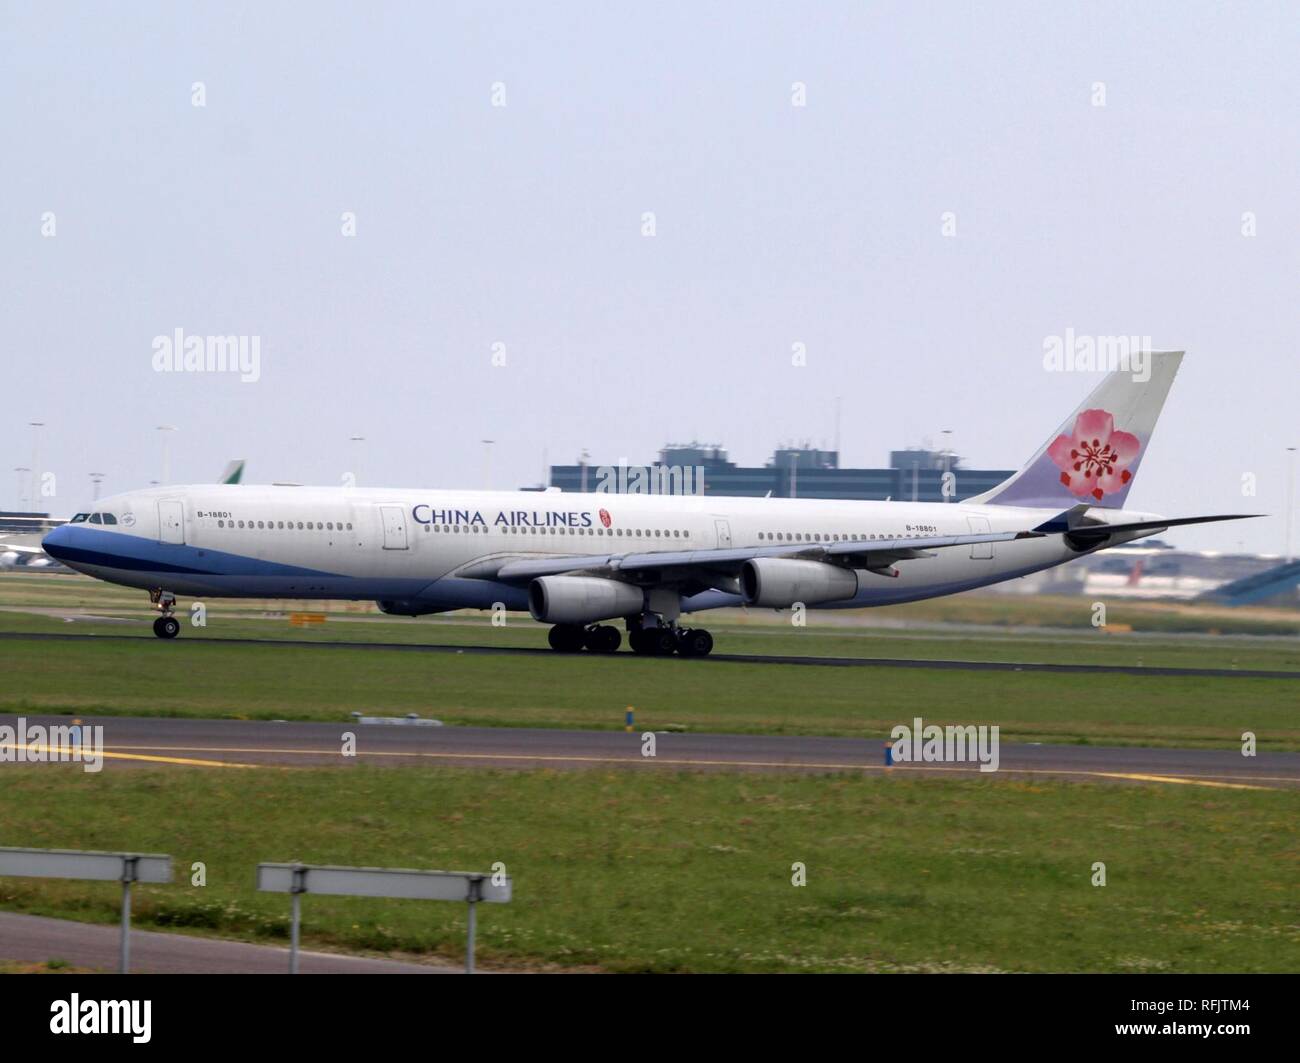 B-18801 China Airlines Airbus A340-313X - cn 402 pic1. Stock Photo